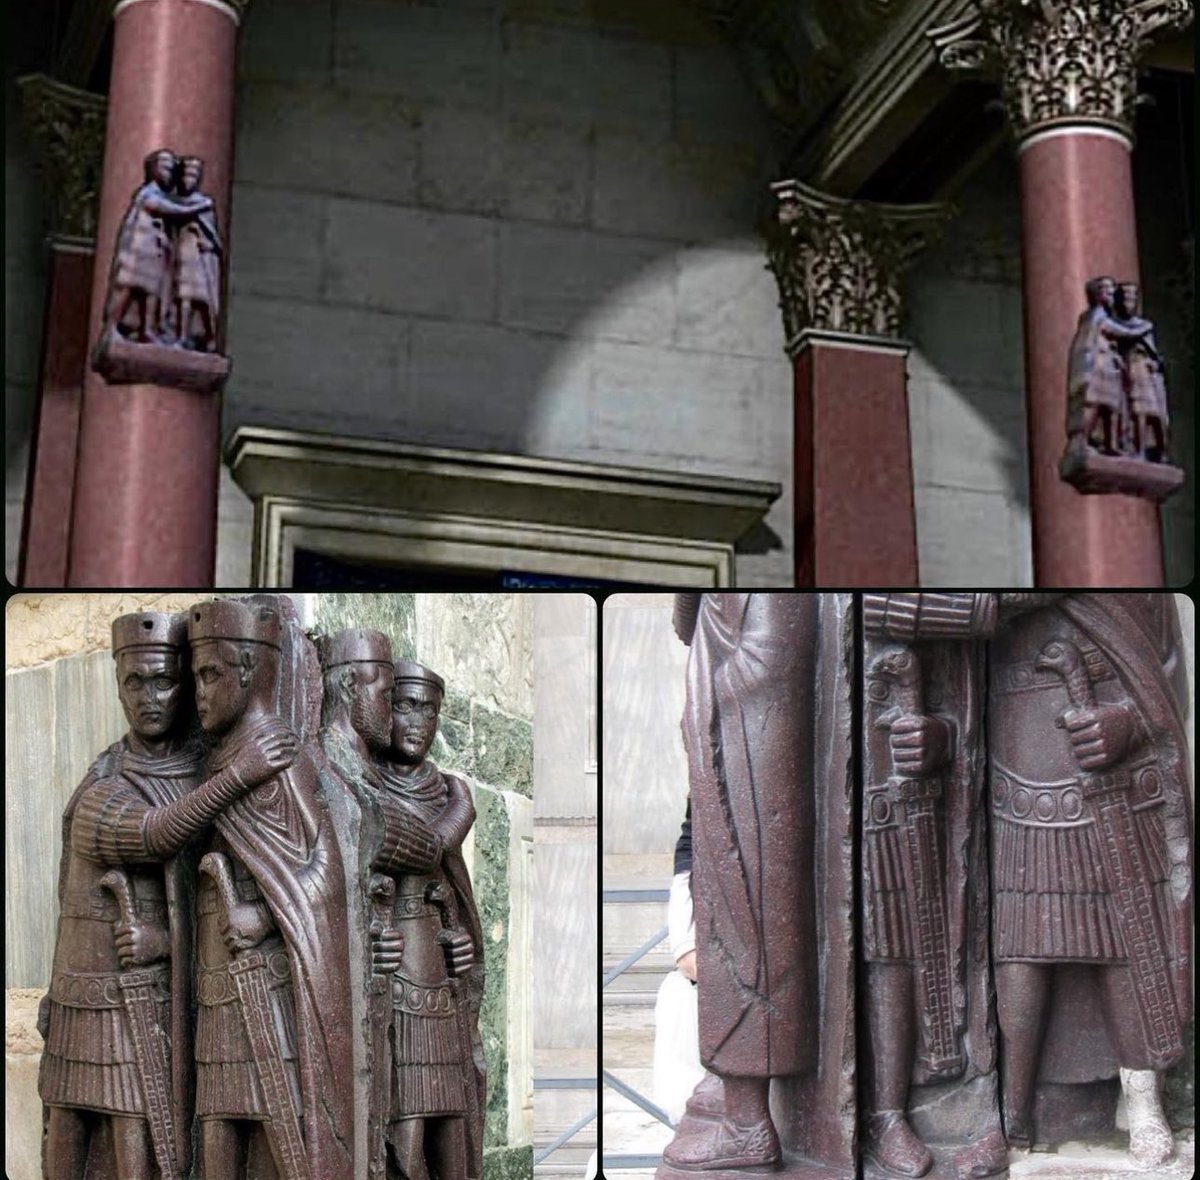 It seems like the porphyry statues of the four tetrarchs in Venice were originally on a column in their original placement in Constantinople. In the reconstruction, I initially felt skeptical they could have been mounted on a column. But looking at a side view, one can see the…